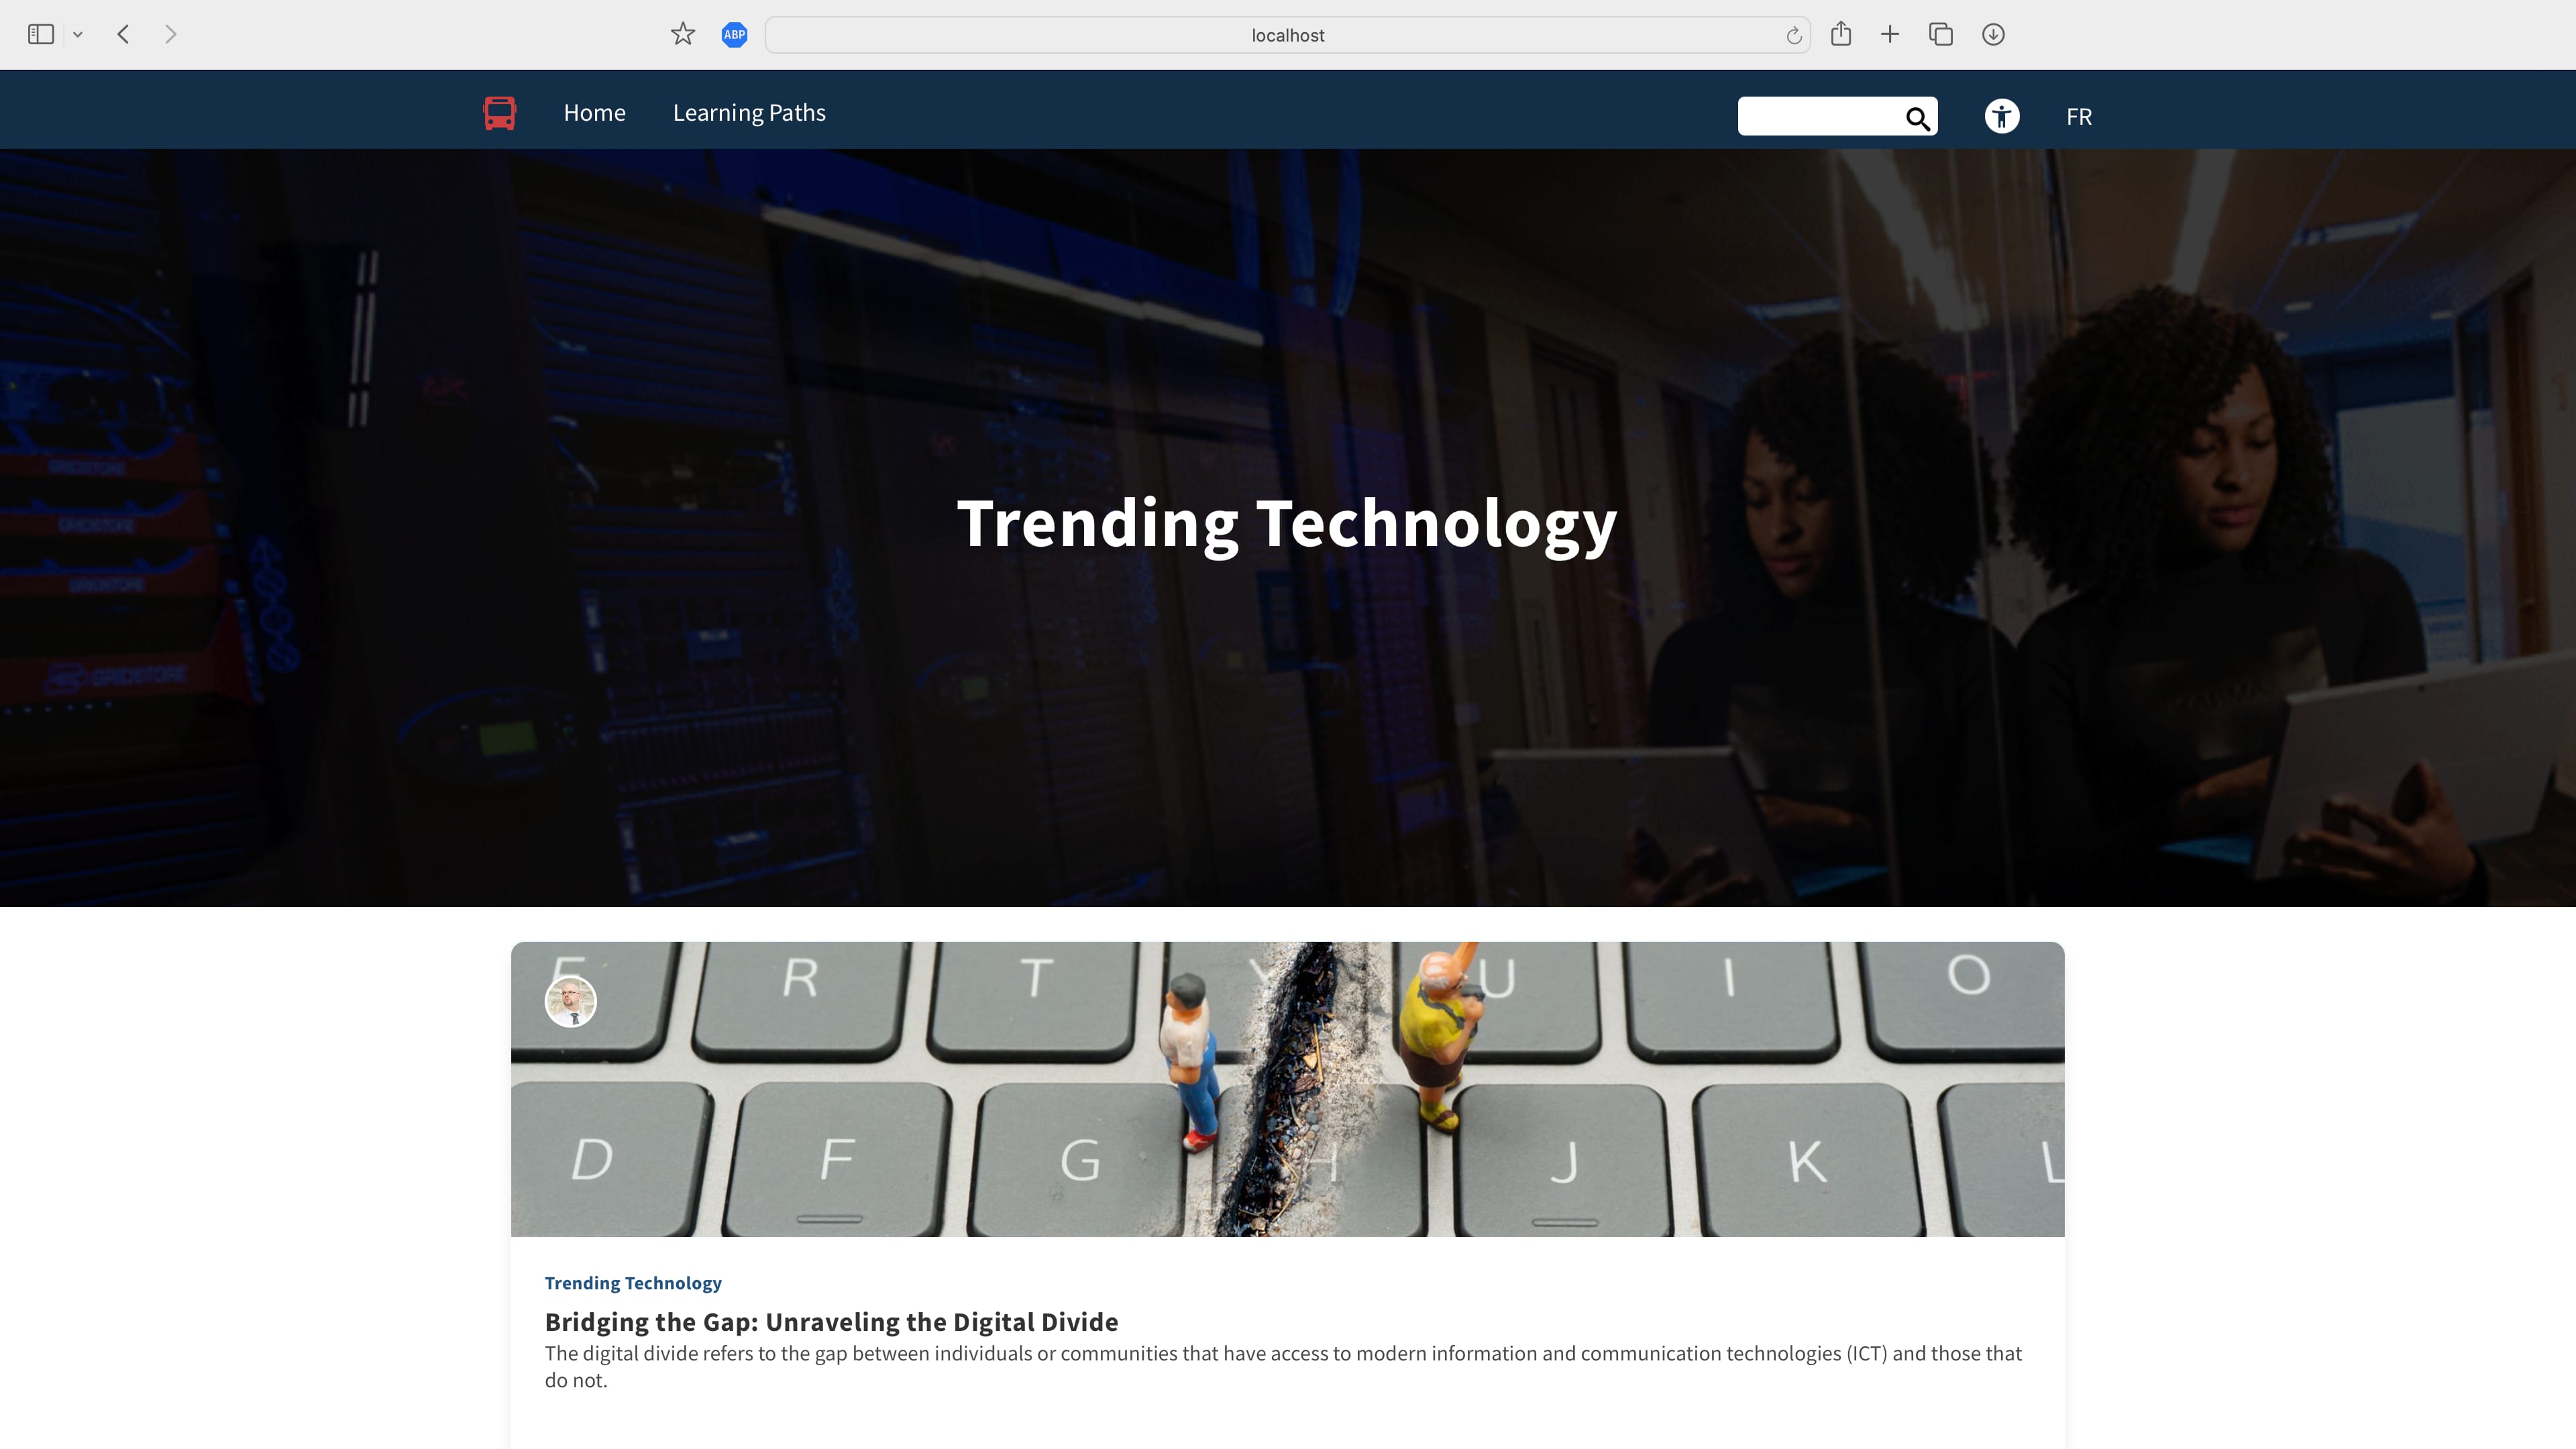 a screenshot of the Trending Technology topic page in Busrides